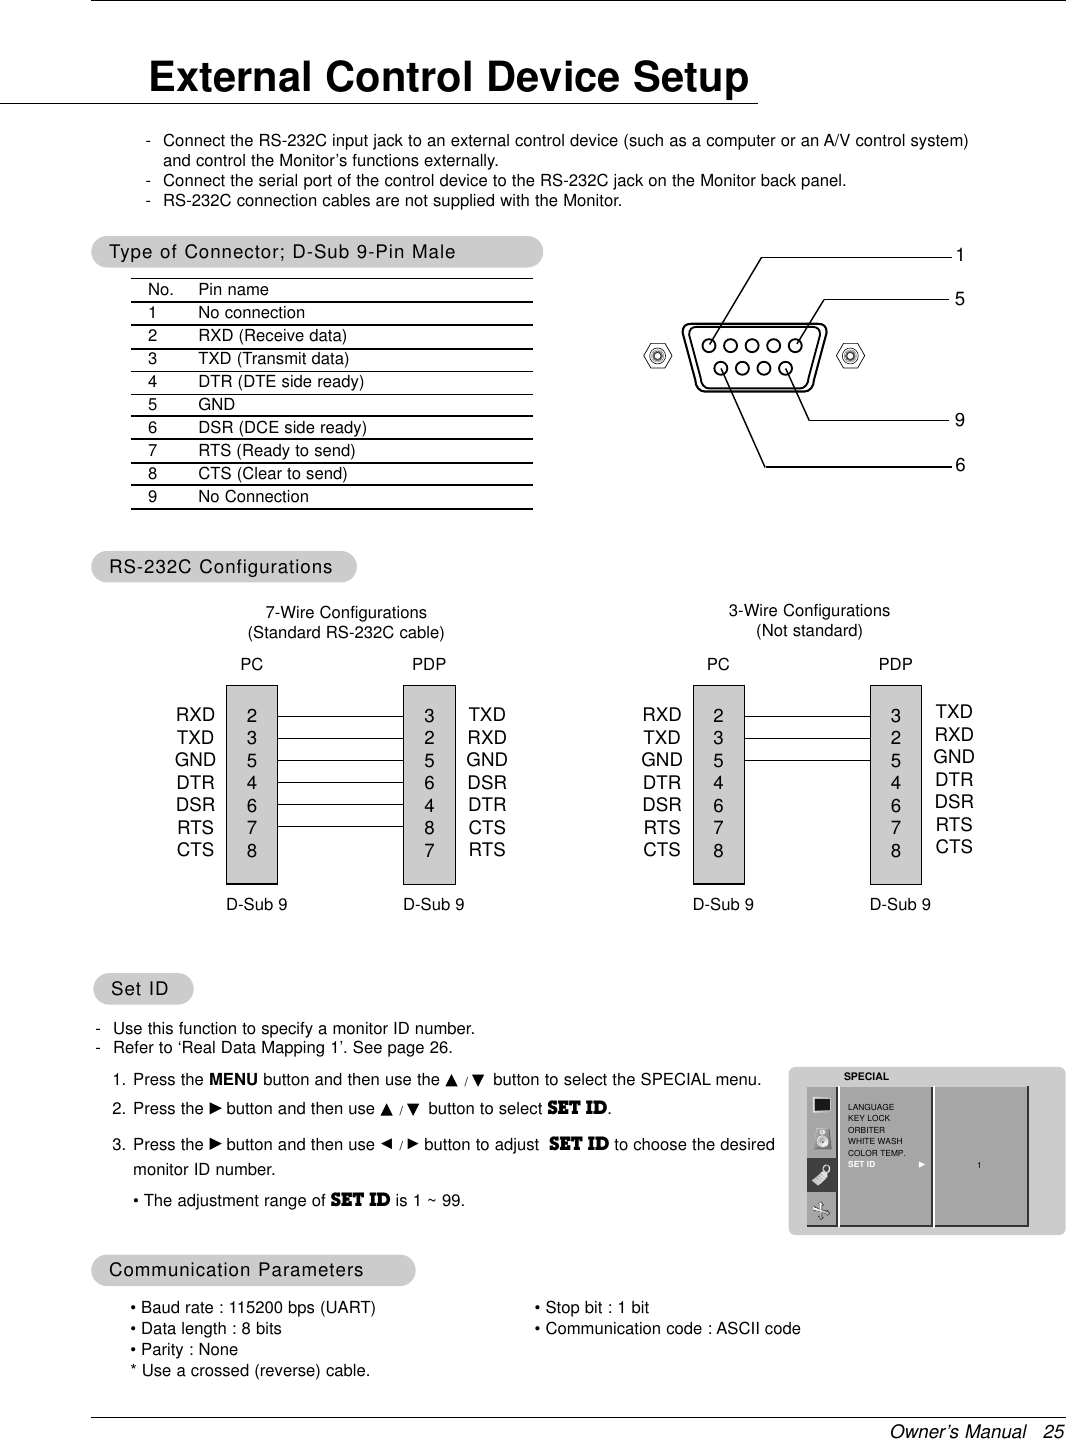 Owner’s Manual   25Set IDSet ID- Use this function to specify a monitor ID number.- Refer to ‘Real Data Mapping 1’. See page 26.1. Press the MENU button and then use the D /Ebutton to select the SPECIAL menu.2. Press the Gbutton and then use D /Ebutton to select SET ID.3. Press the Gbutton and then use F / Gbutton to adjust  SET ID to choose the desiredmonitor ID number.• The adjustment range of SET ID is 1 ~ 99.No. Pin name1 No connection2 RXD (Receive data)3 TXD (Transmit data)4 DTR (DTE side ready)5 GND6 DSR (DCE side ready)7 RTS (Ready to send)8 CTS (Clear to send)9 No Connection15692354678RXDTXDGNDDTRDSRRTSCTSTXDRXDGNDDSRDTRCTSRTSPC7-Wire Configurations(Standard RS-232C cable)D-Sub 93256487PDPD-Sub 92354678RXDTXDGNDDTRDSRRTSCTSTXDRXDGNDDTRDSRRTSCTSPC3-Wire Configurations(Not standard)D-Sub 93254678PDPD-Sub 9External Control Device Setup- Connect the RS-232C input jack to an external control device (such as a computer or an A/V control system)and control the Monitor’s functions externally.- Connect the serial port of the control device to the RS-232C jack on the Monitor back panel.- RS-232C connection cables are not supplied with the Monitor.TType of Connector; D-Sub 9-Pin Maleype of Connector; D-Sub 9-Pin MaleRS-232C ConfigurationsRS-232C Configurations• Baud rate : 115200 bps (UART)• Data length : 8 bits• Parity : None* Use a crossed (reverse) cable.• Stop bit : 1 bit• Communication code : ASCII codeCommunication ParametersCommunication ParametersLANGUAGEKEY LOCK ORBITERWHITE WASHCOLOR TEMP.SET ID                 GSPECIAL1